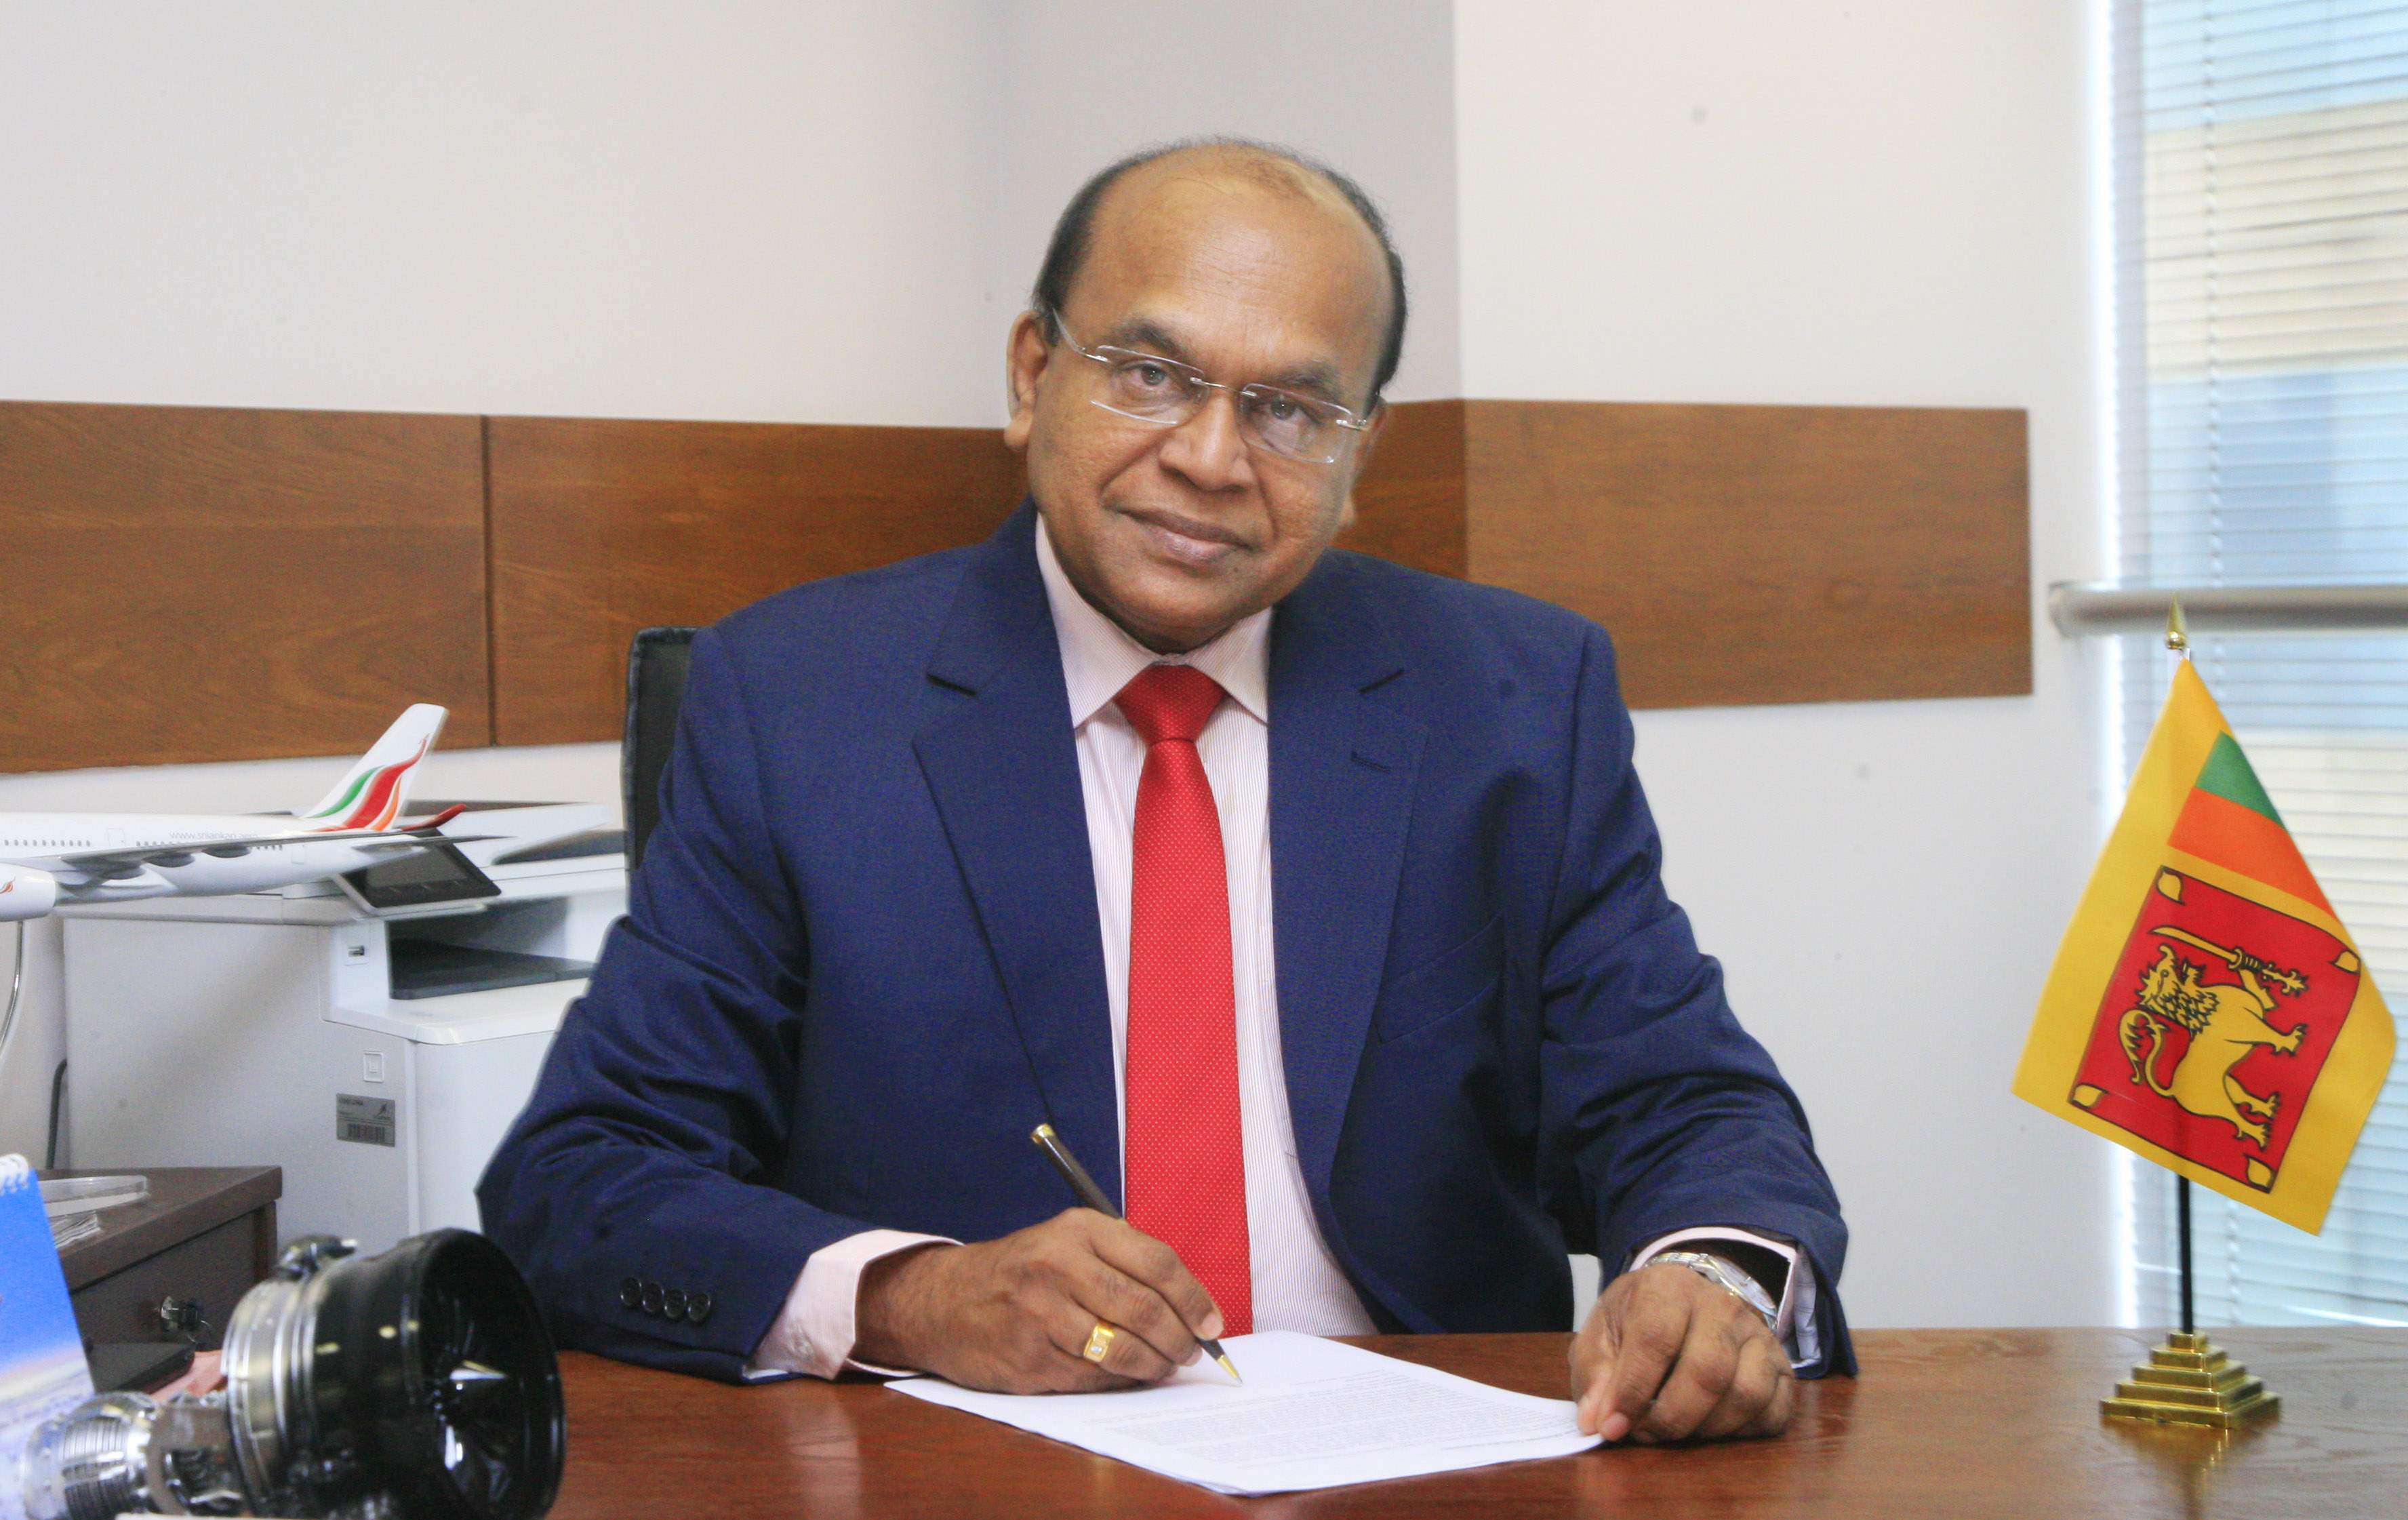 Mr. G. S. Withanage, Chairman SriLankan Airlines Ltd. and SriLankan Catering Ltd.